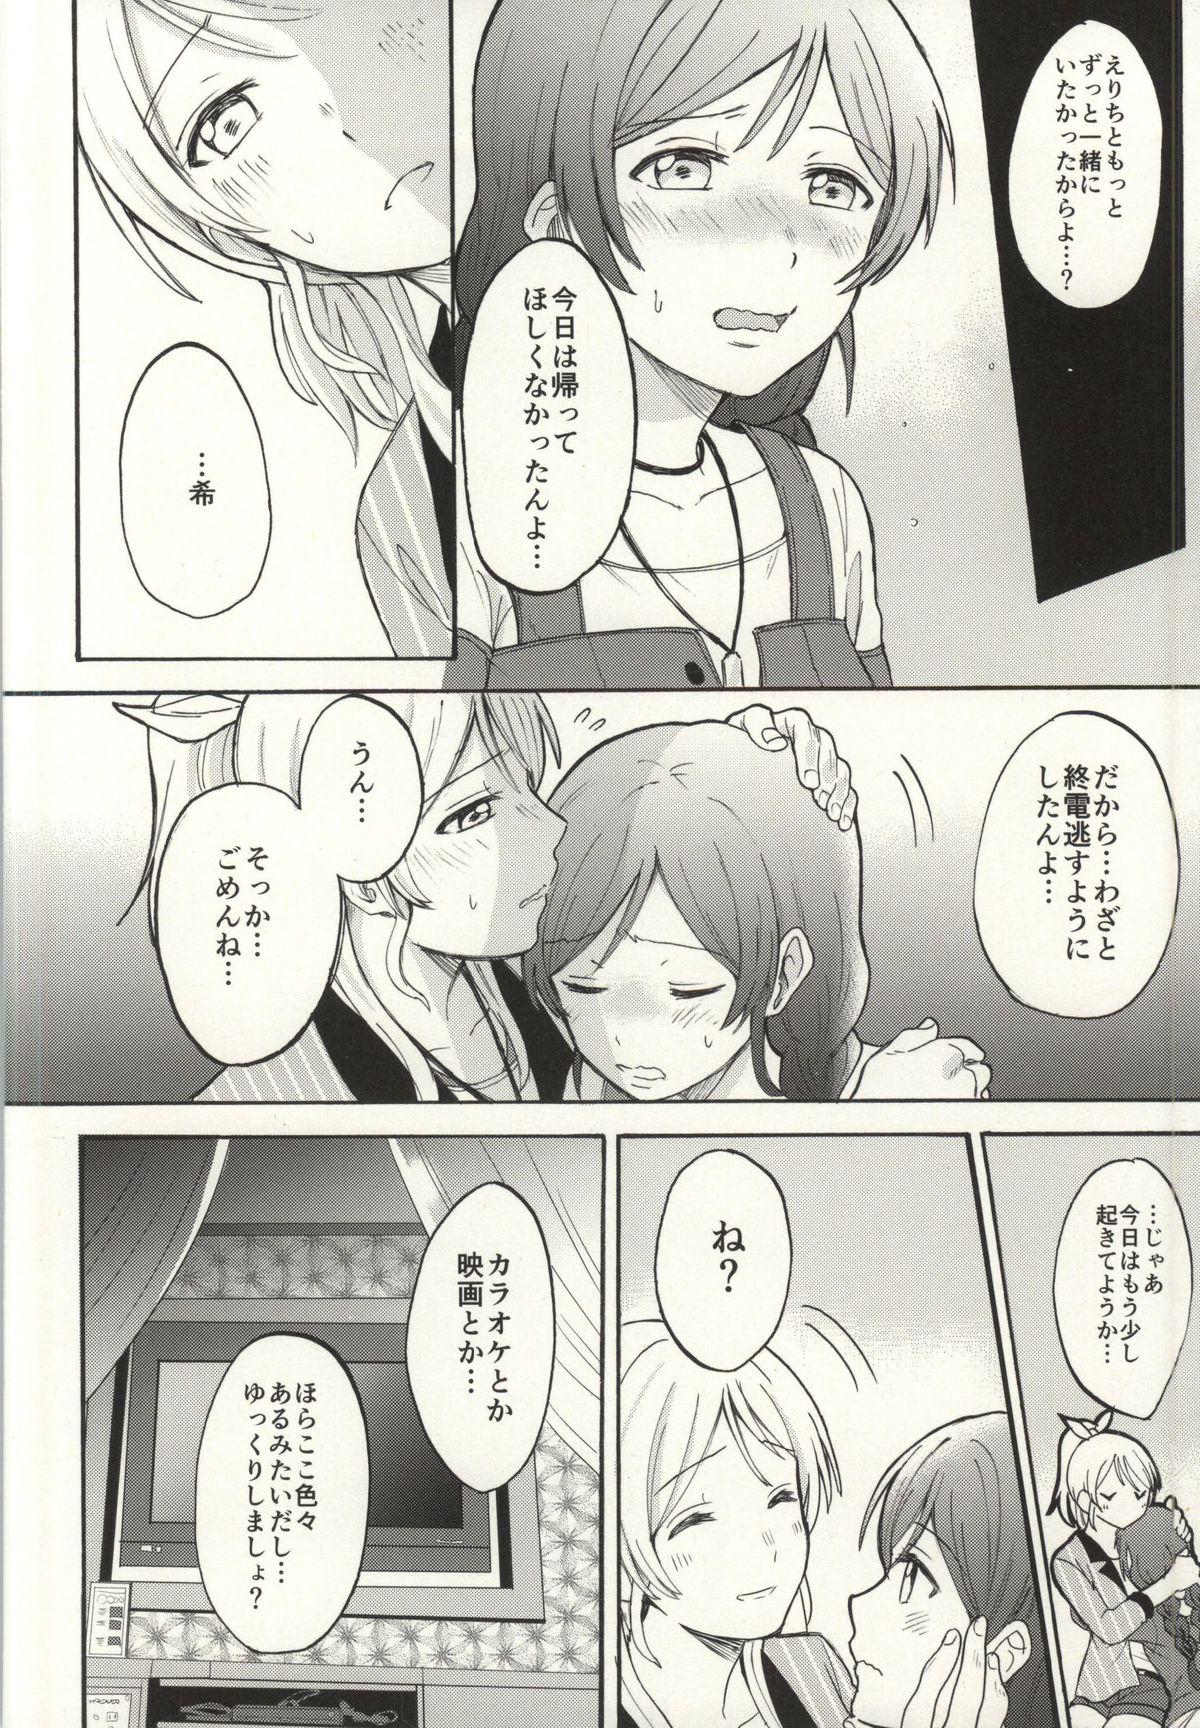 Eating Pussy Dame Dame! My Darling - Love live Stretch - Page 6